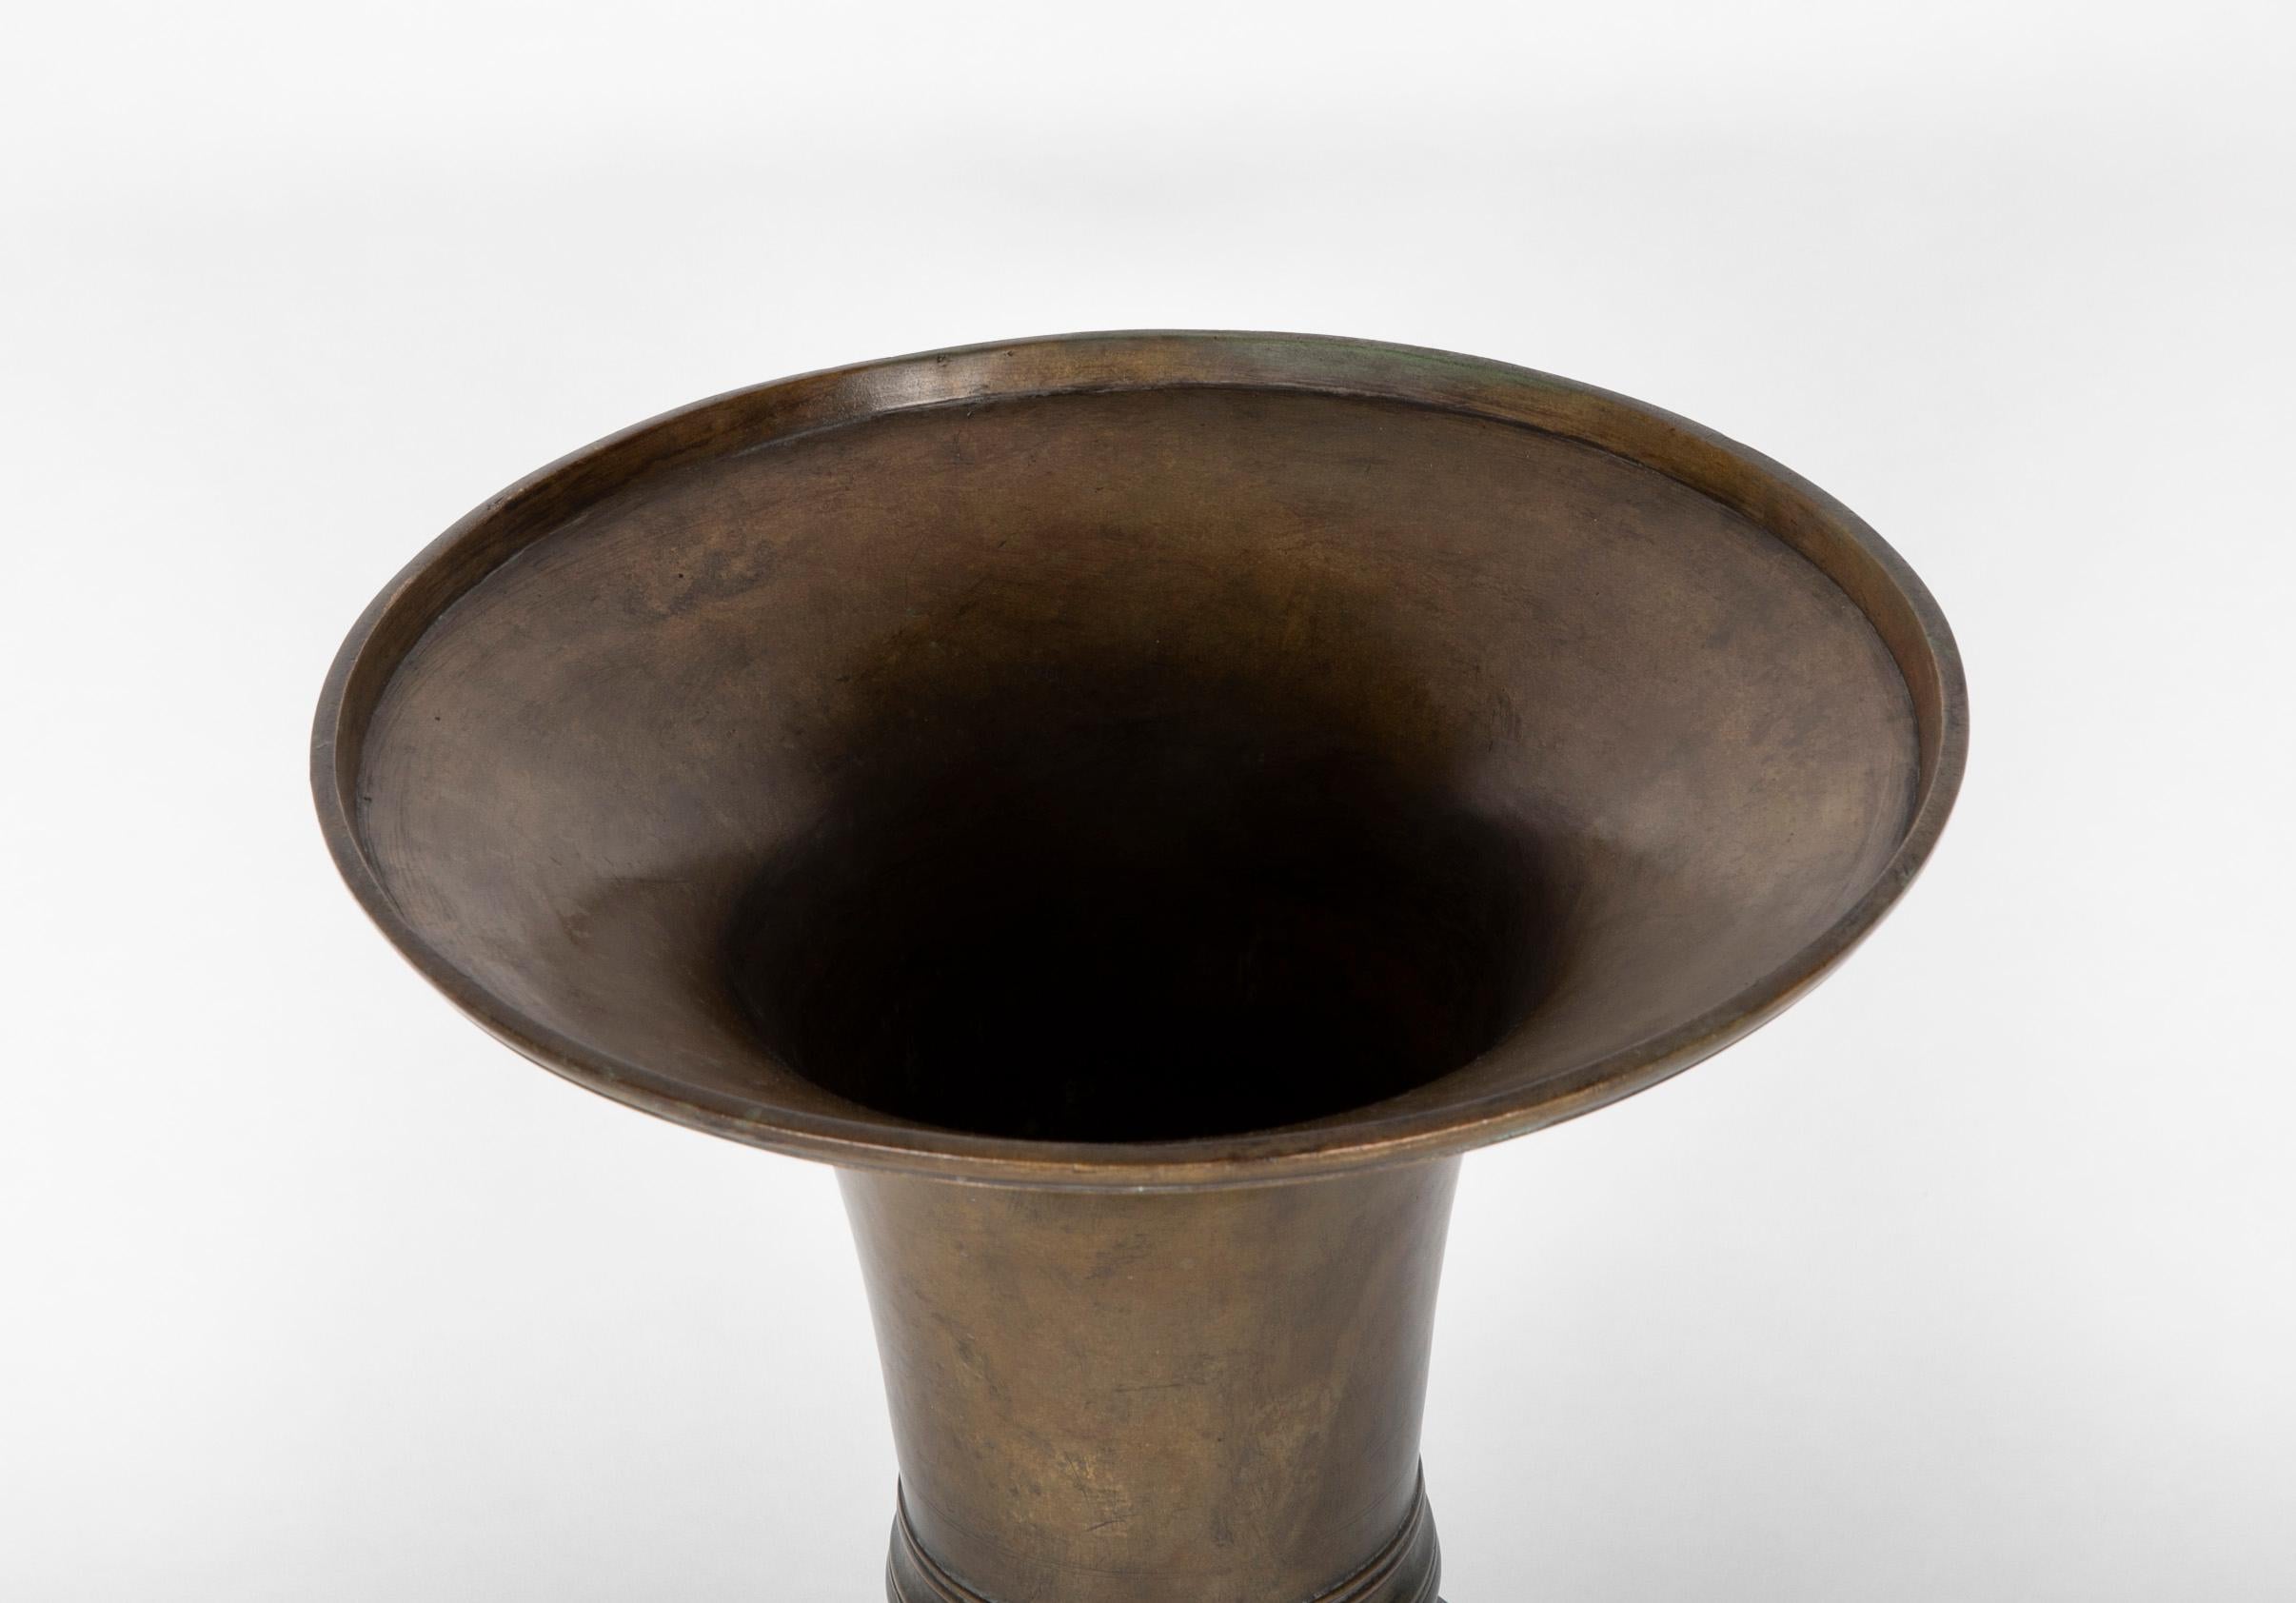 A large scale 19th century Japanese bronze vase of trumpet form with a wide mouth over a narrow waist supported by a stepped base. The form shows the influence of Chinese Archaic bronzes. A great setting for long stem flowers or bouquets. This